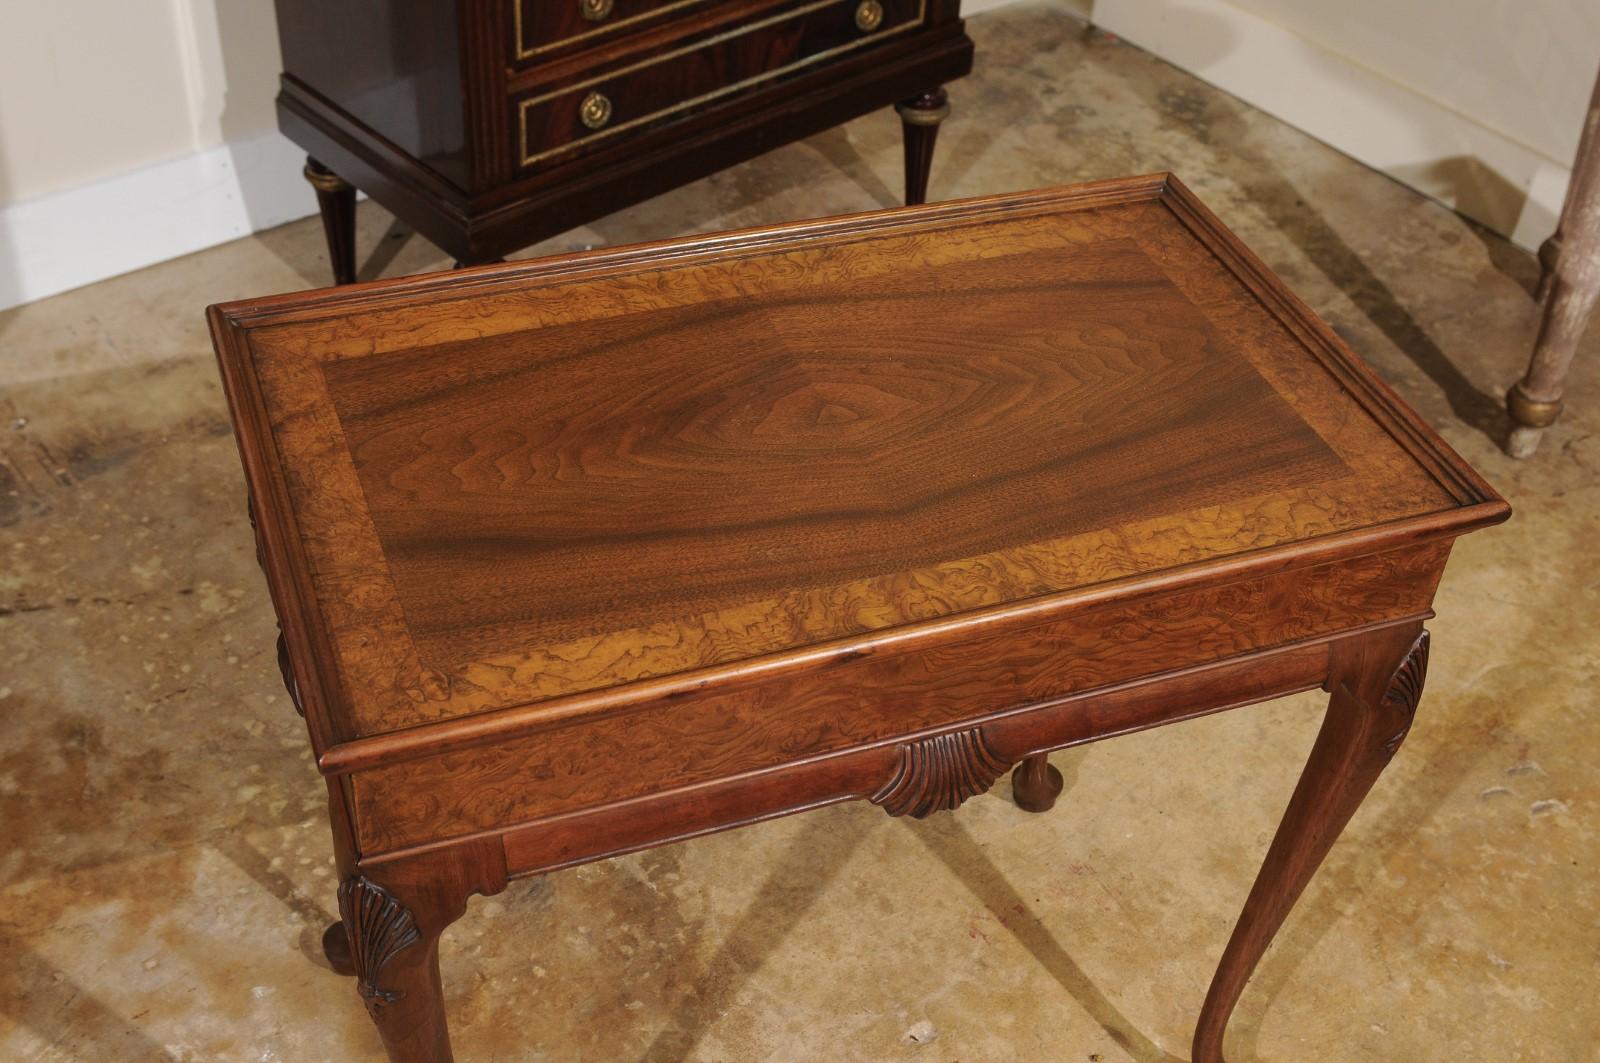 Vintage Baker Furniture Co. Tea or Side Table In Good Condition For Sale In Chamblee, GA